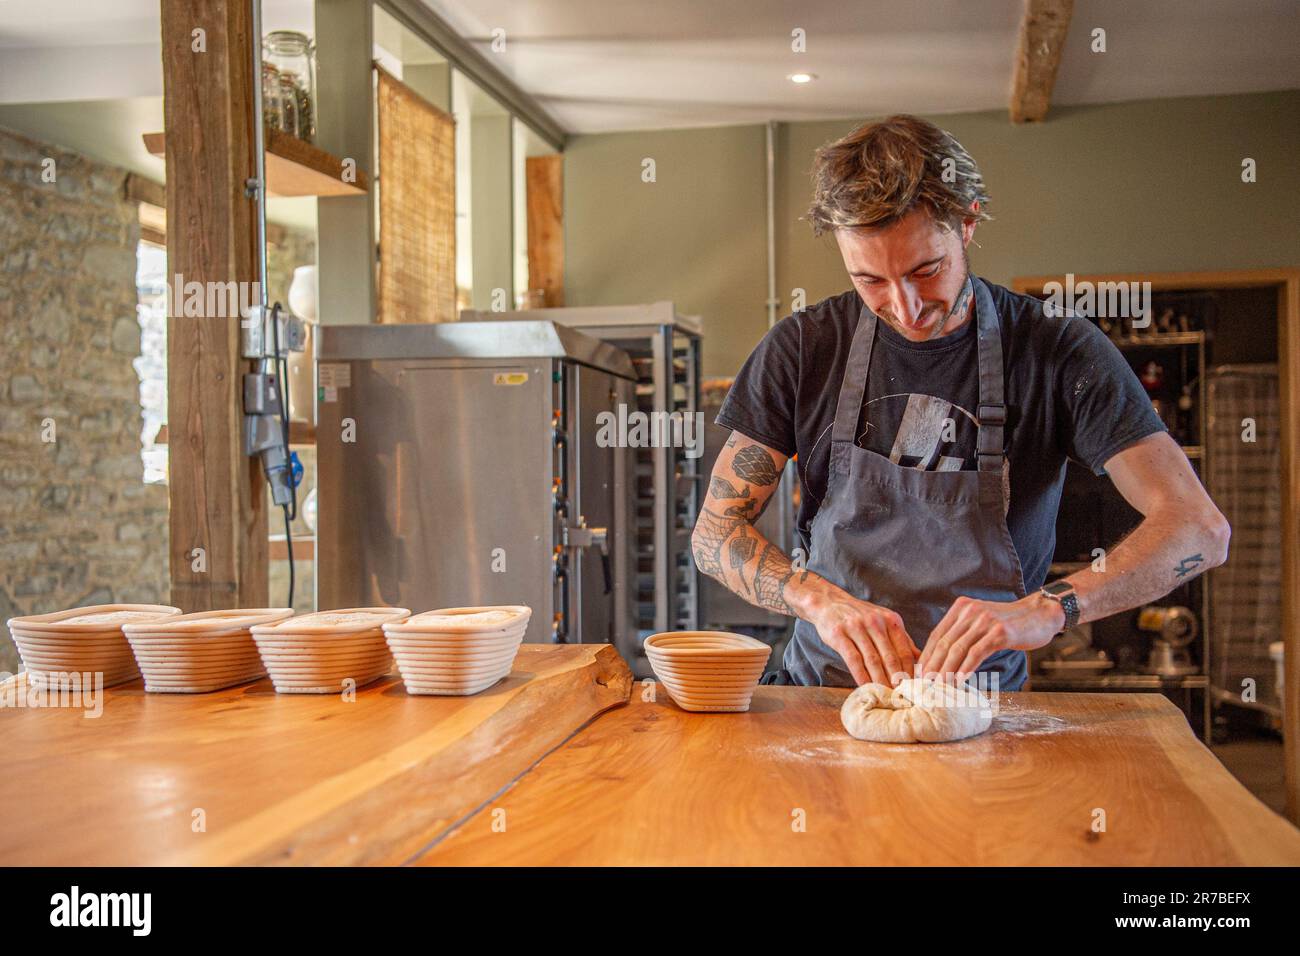 baker and pastry chef Zak Poulot in the new bakery Stock Photo